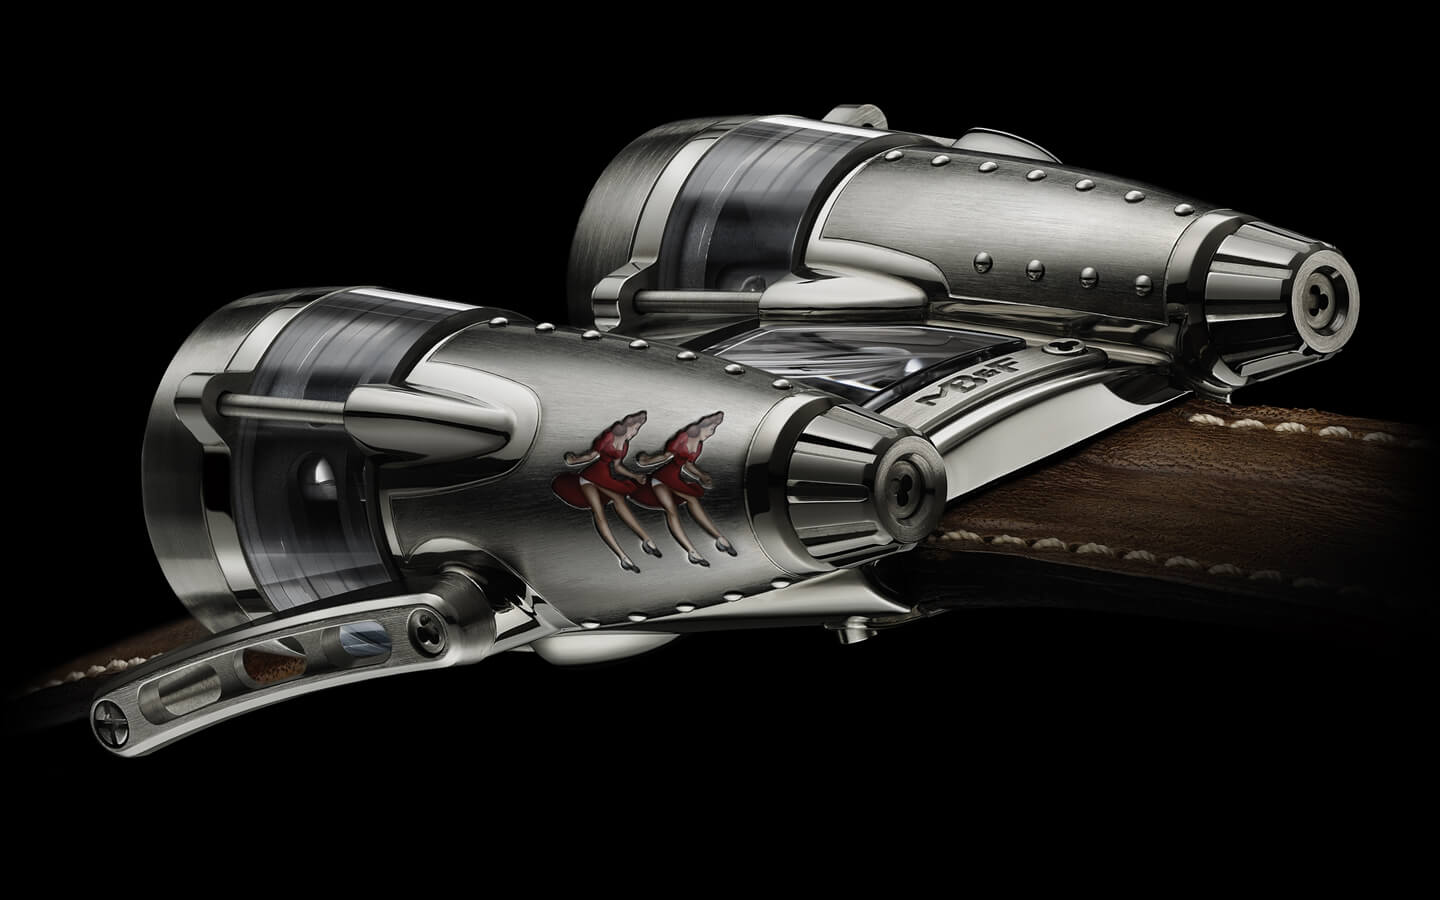 MB&F HM4 Double Trouble with replica World War II bomber nose art